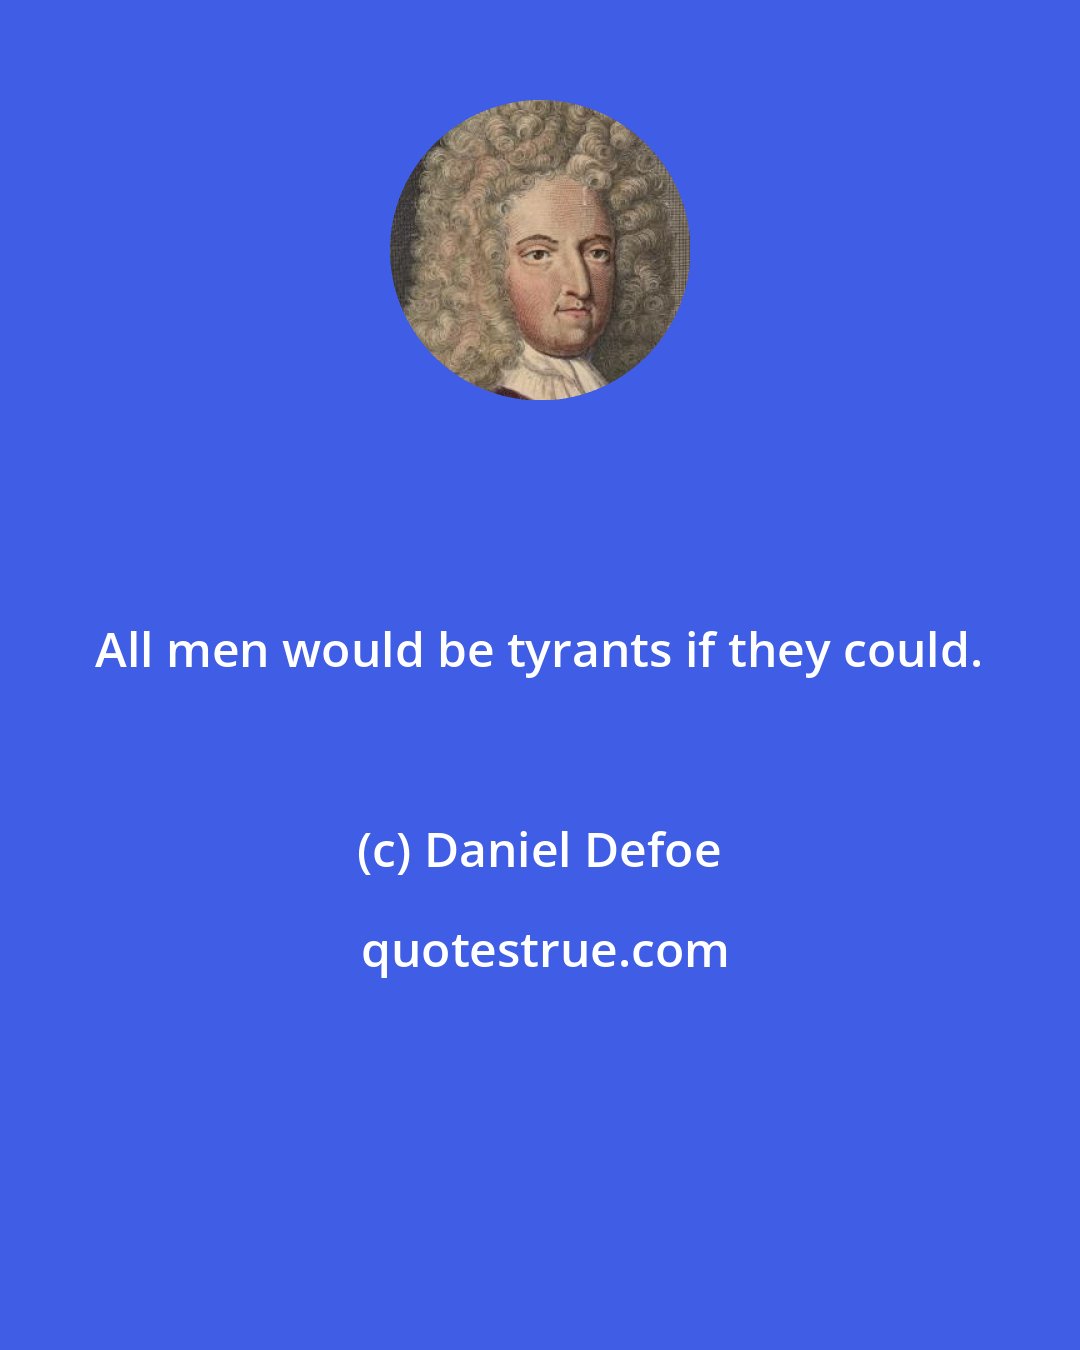 Daniel Defoe: All men would be tyrants if they could.